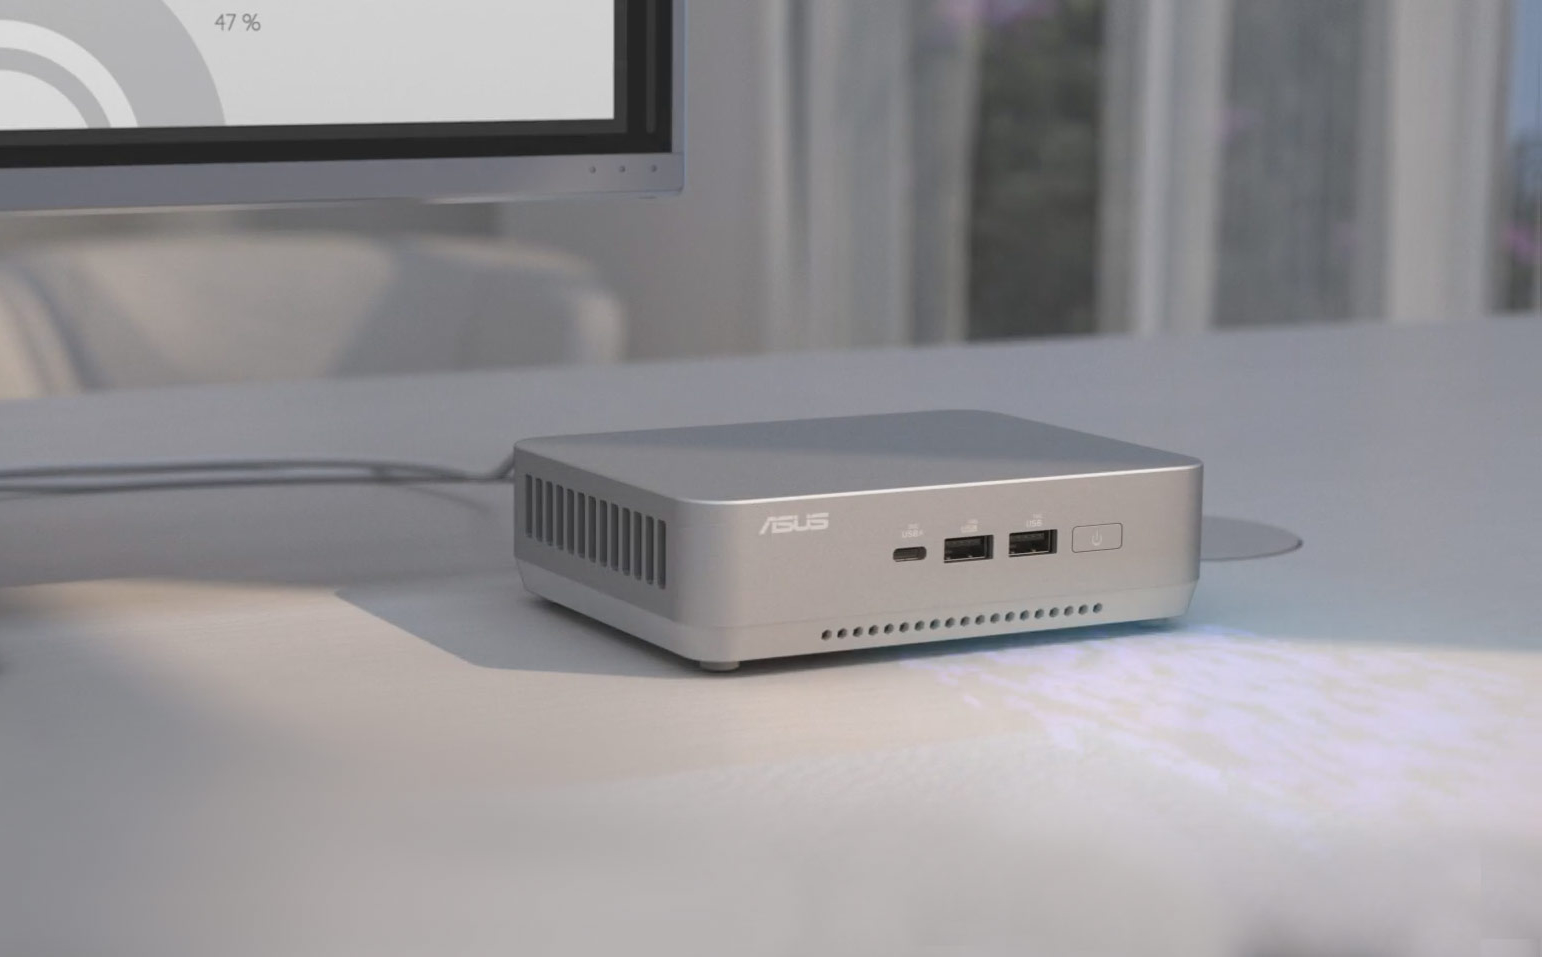 ASUS introduces NUC 14 Pro and NUC 14 Pro Plus mini-PCs with Intel Meteor Lake processors and Thunderbolt 4 connectivity